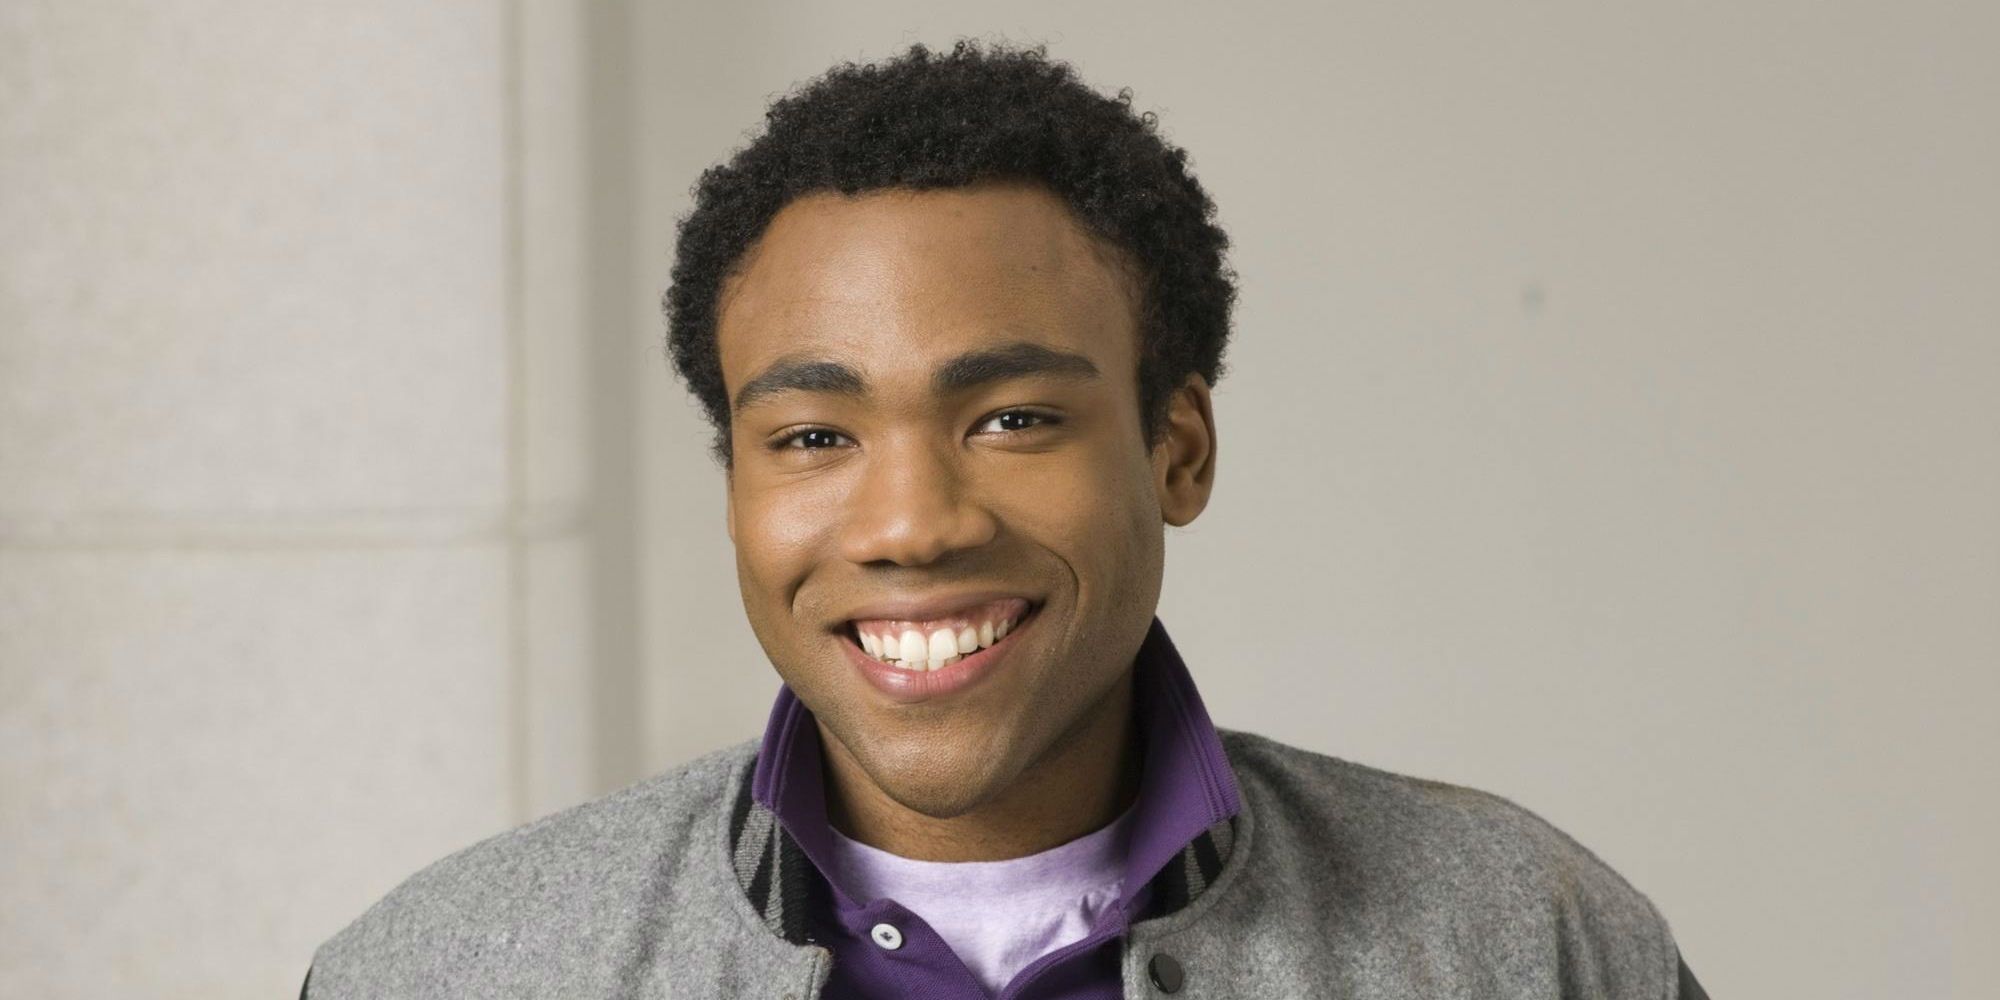 Tory Barnes smiling in a promotional photo for Community